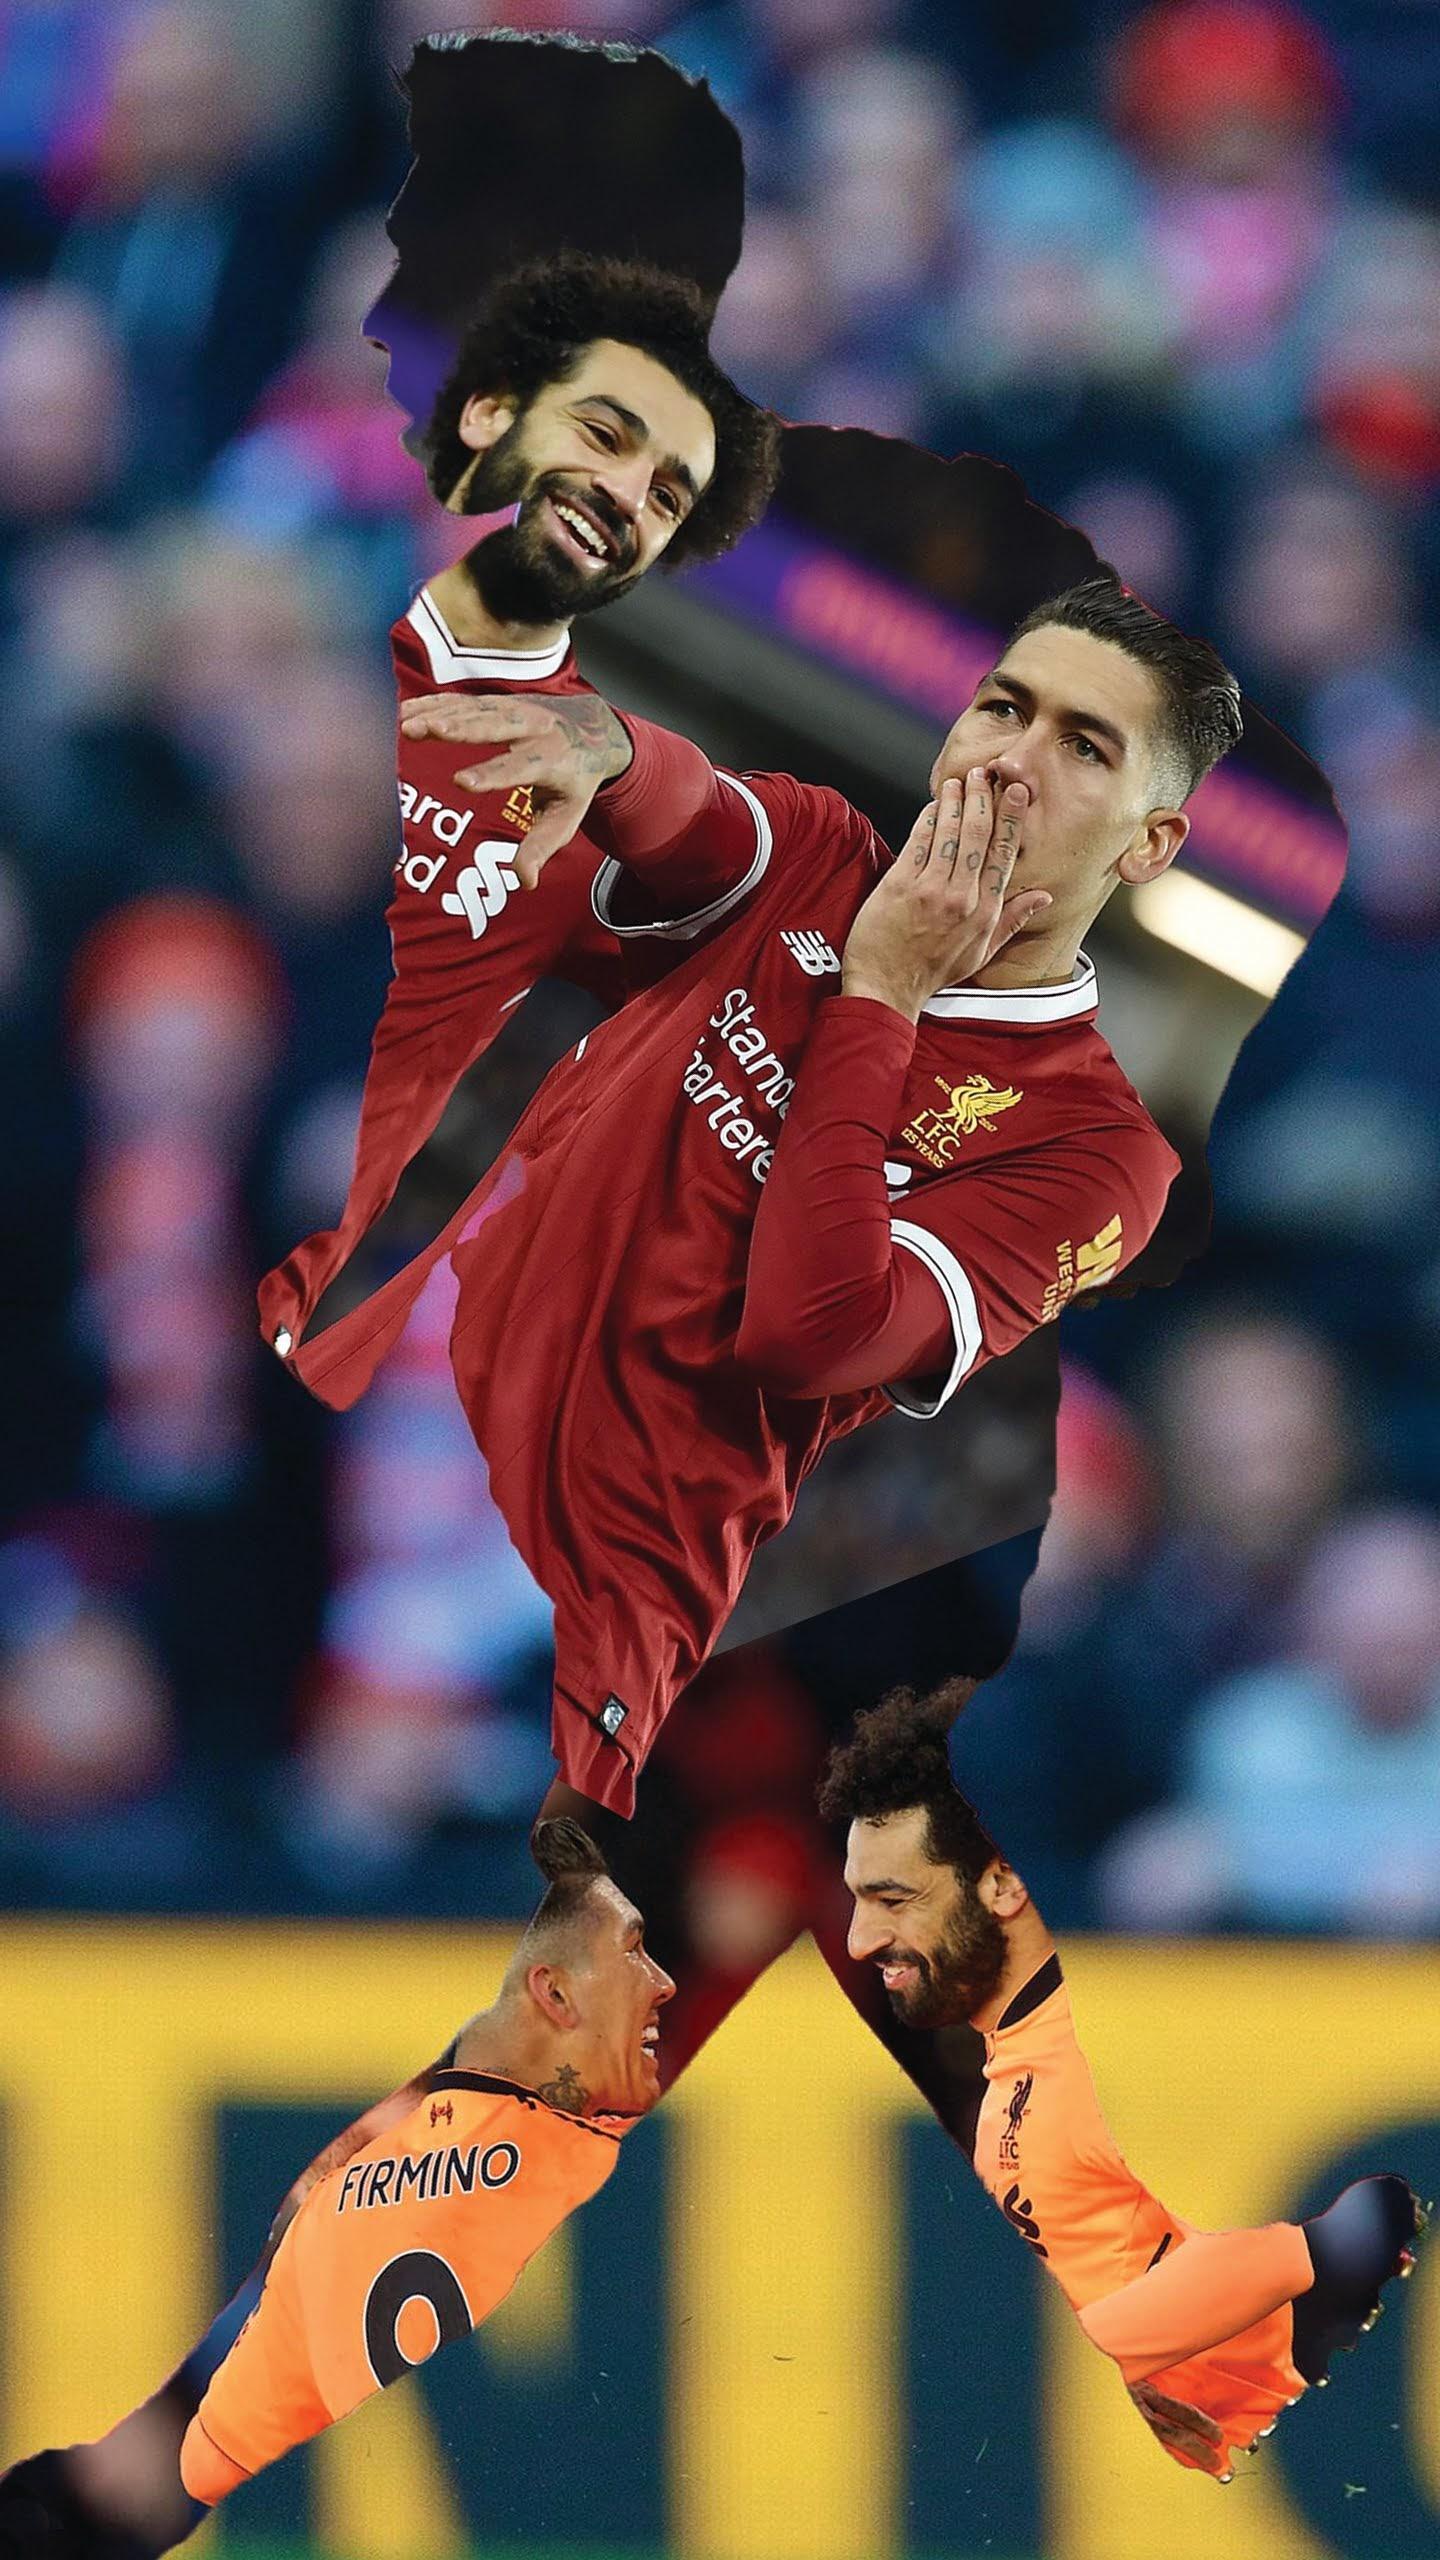 Firmino no look mobile wallpaper, hope it's any good